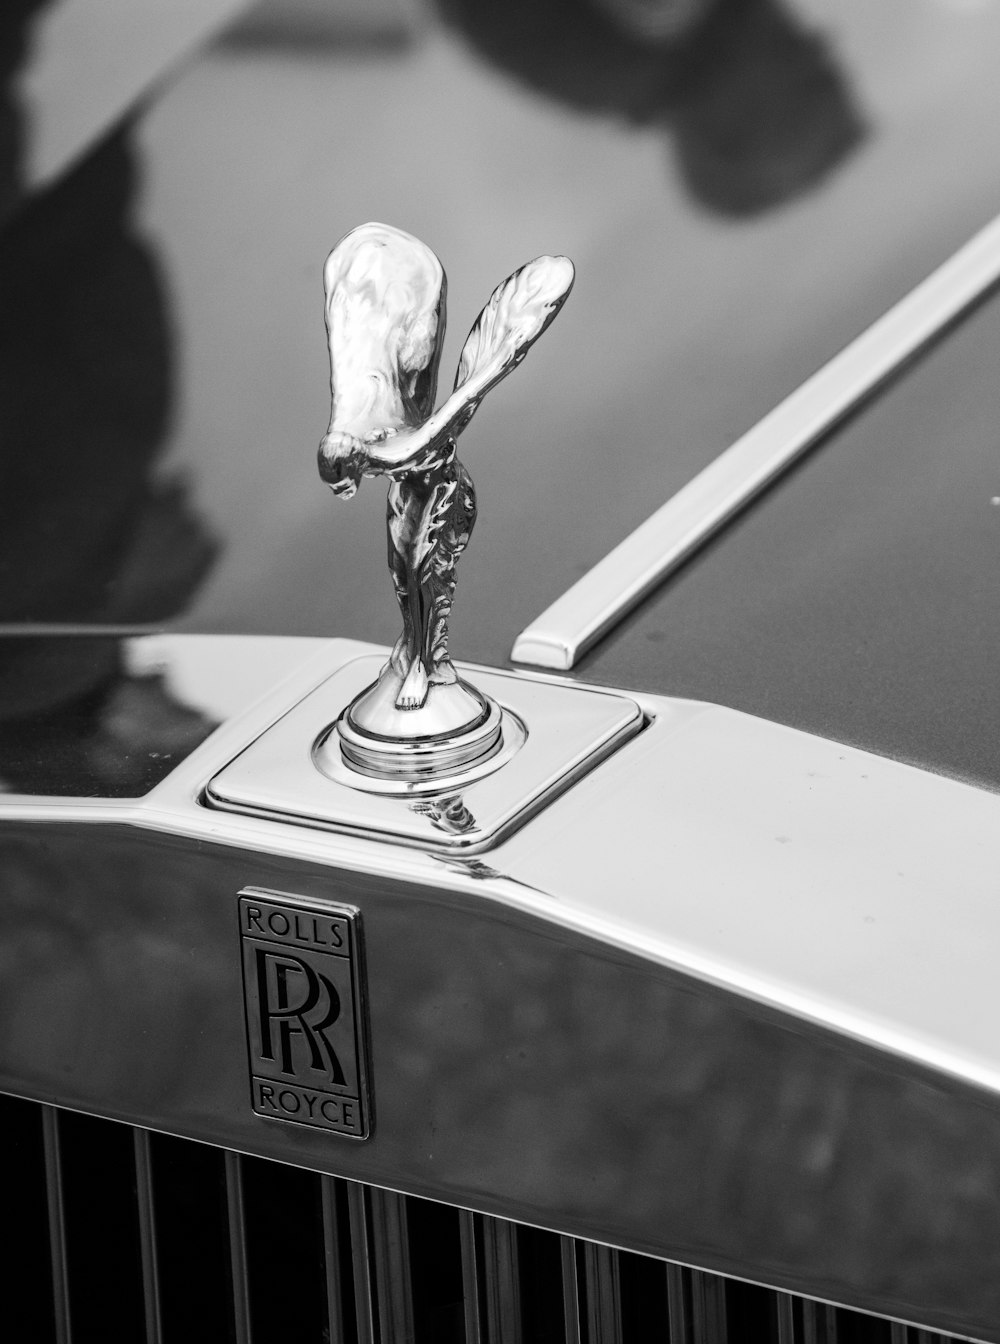 550+ Rolls Royce Pictures | Download Free Images on Unsplash